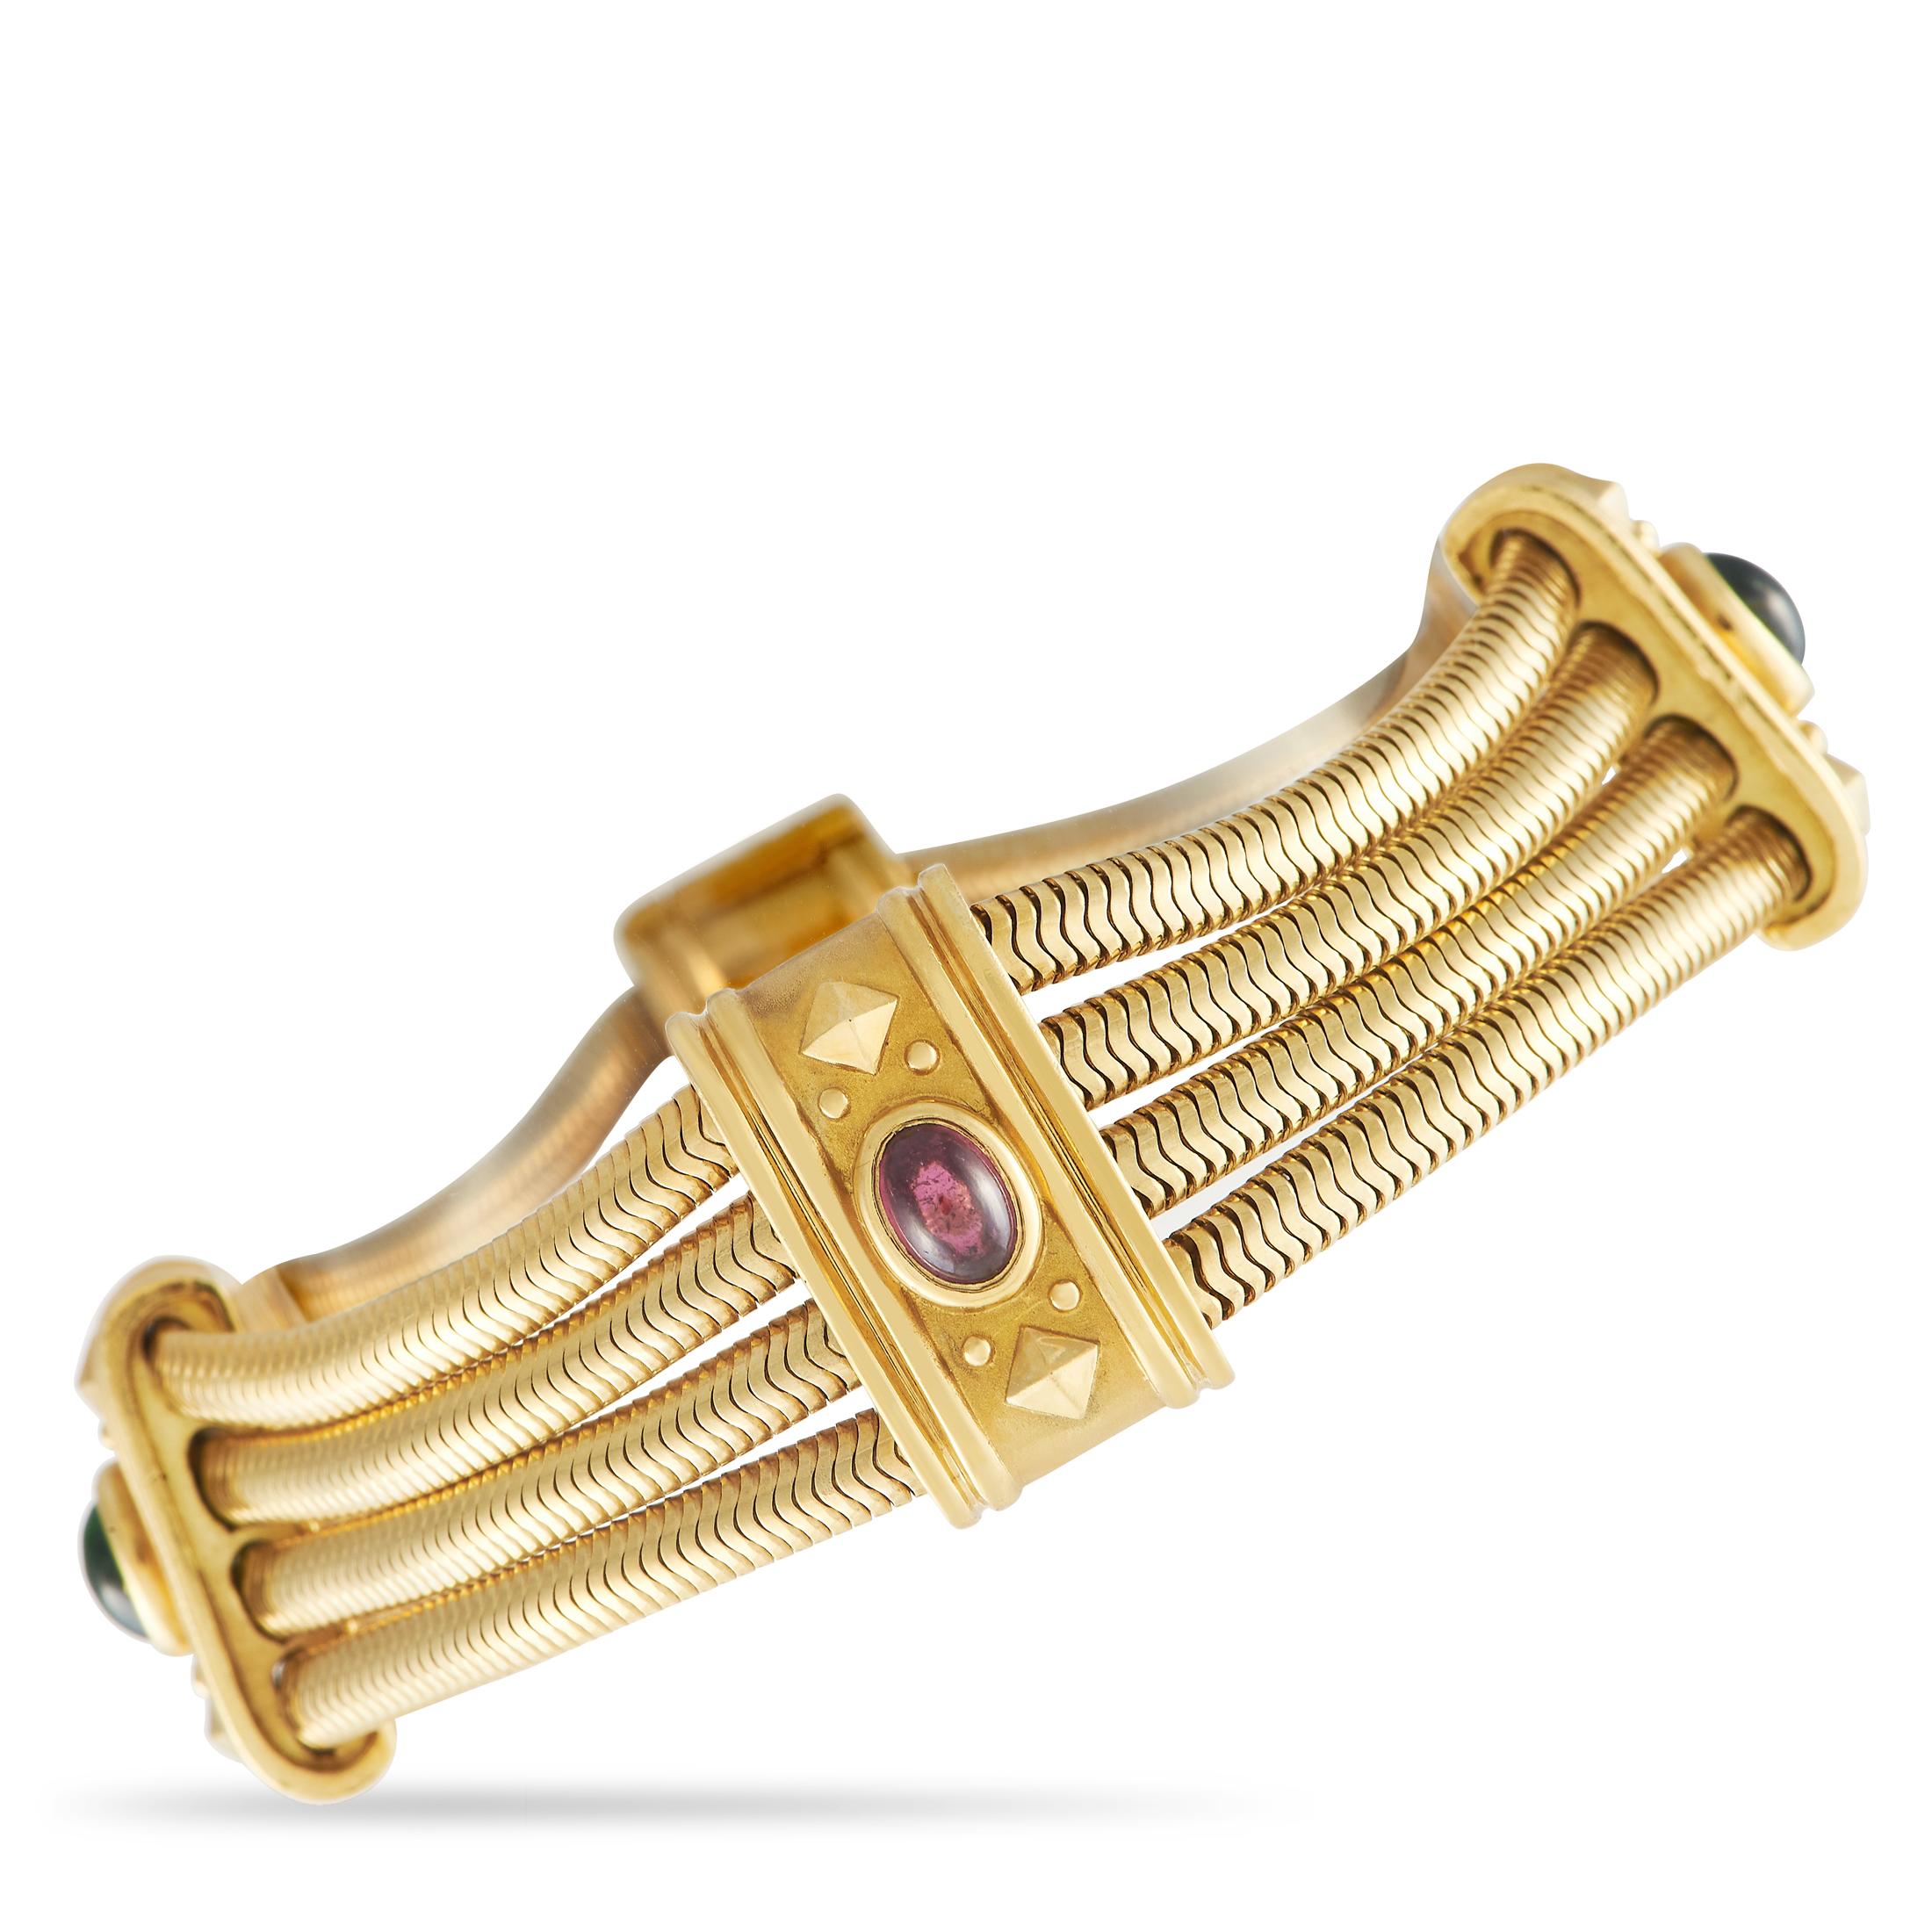 Bring interest and intrigue to your looks with this vintage bracelet. This SeidenGang piece features four rows of snake chains connected by rectangular bars punctuated by a bezel-set tourmaline. The multi-strand bracelet is fashioned in rich 18K